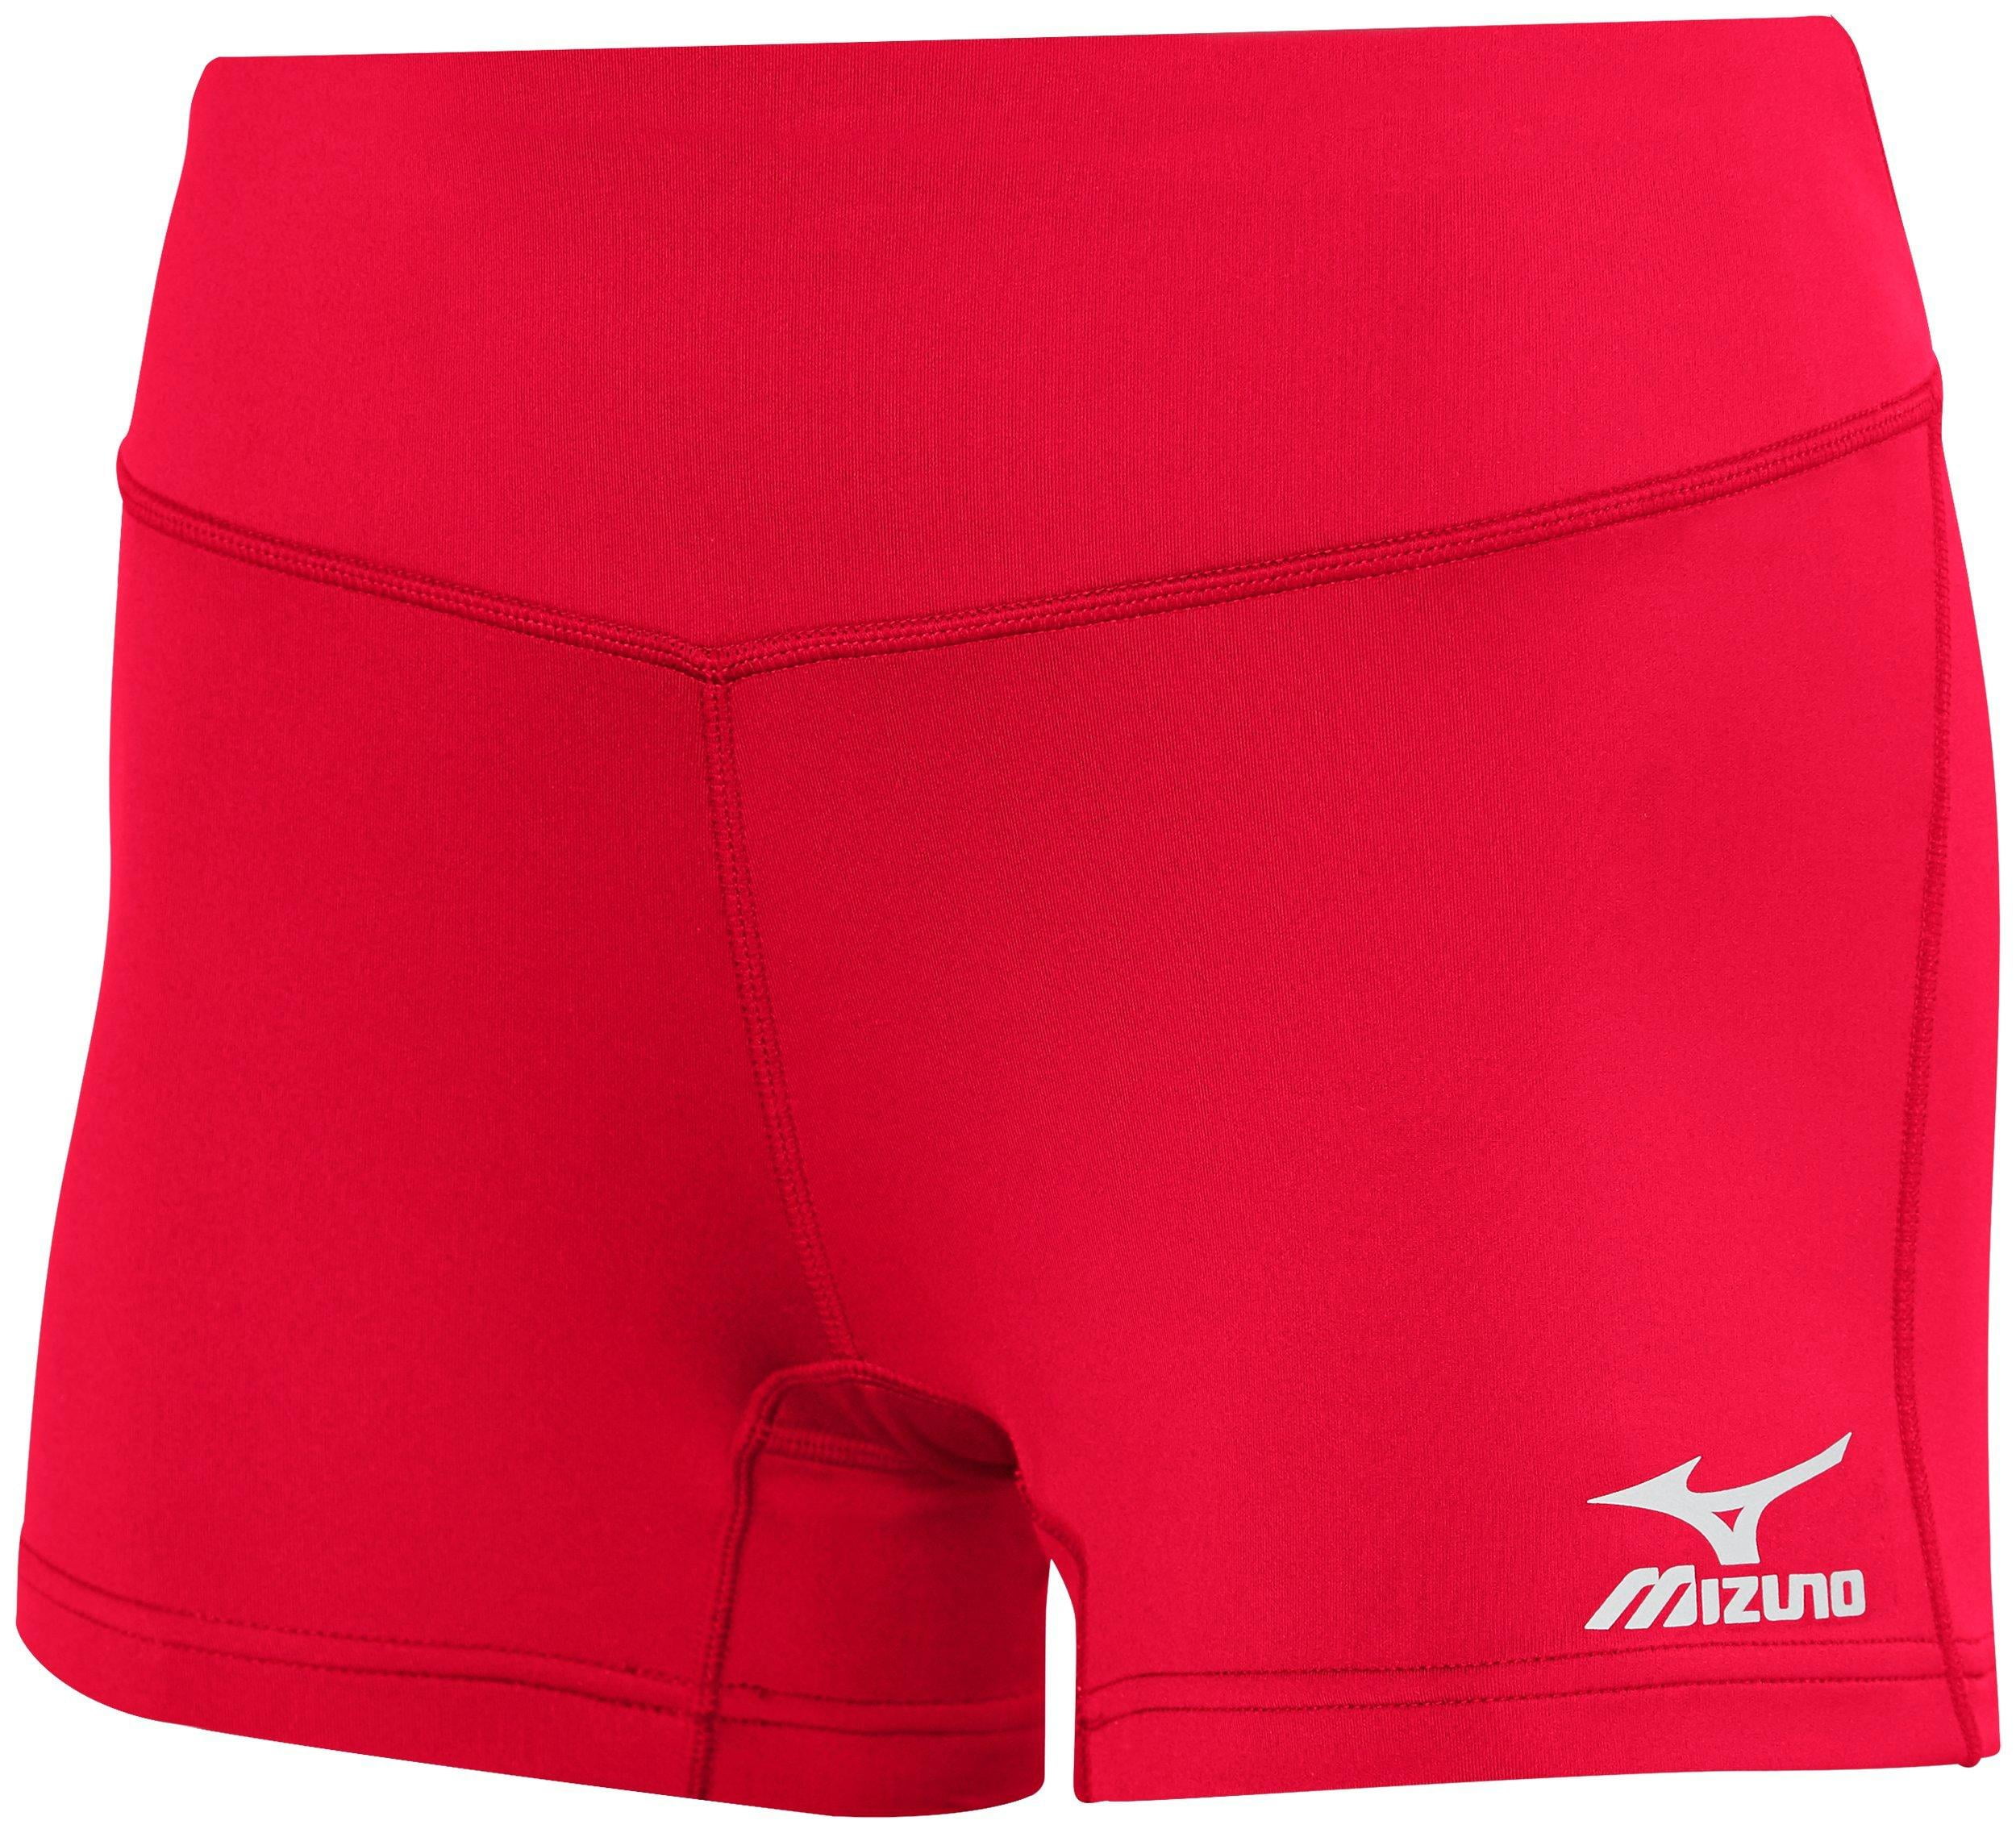 Mizuno Victory 3.5 Inseam Volleyball Shorts, Size Large, Red (1010)